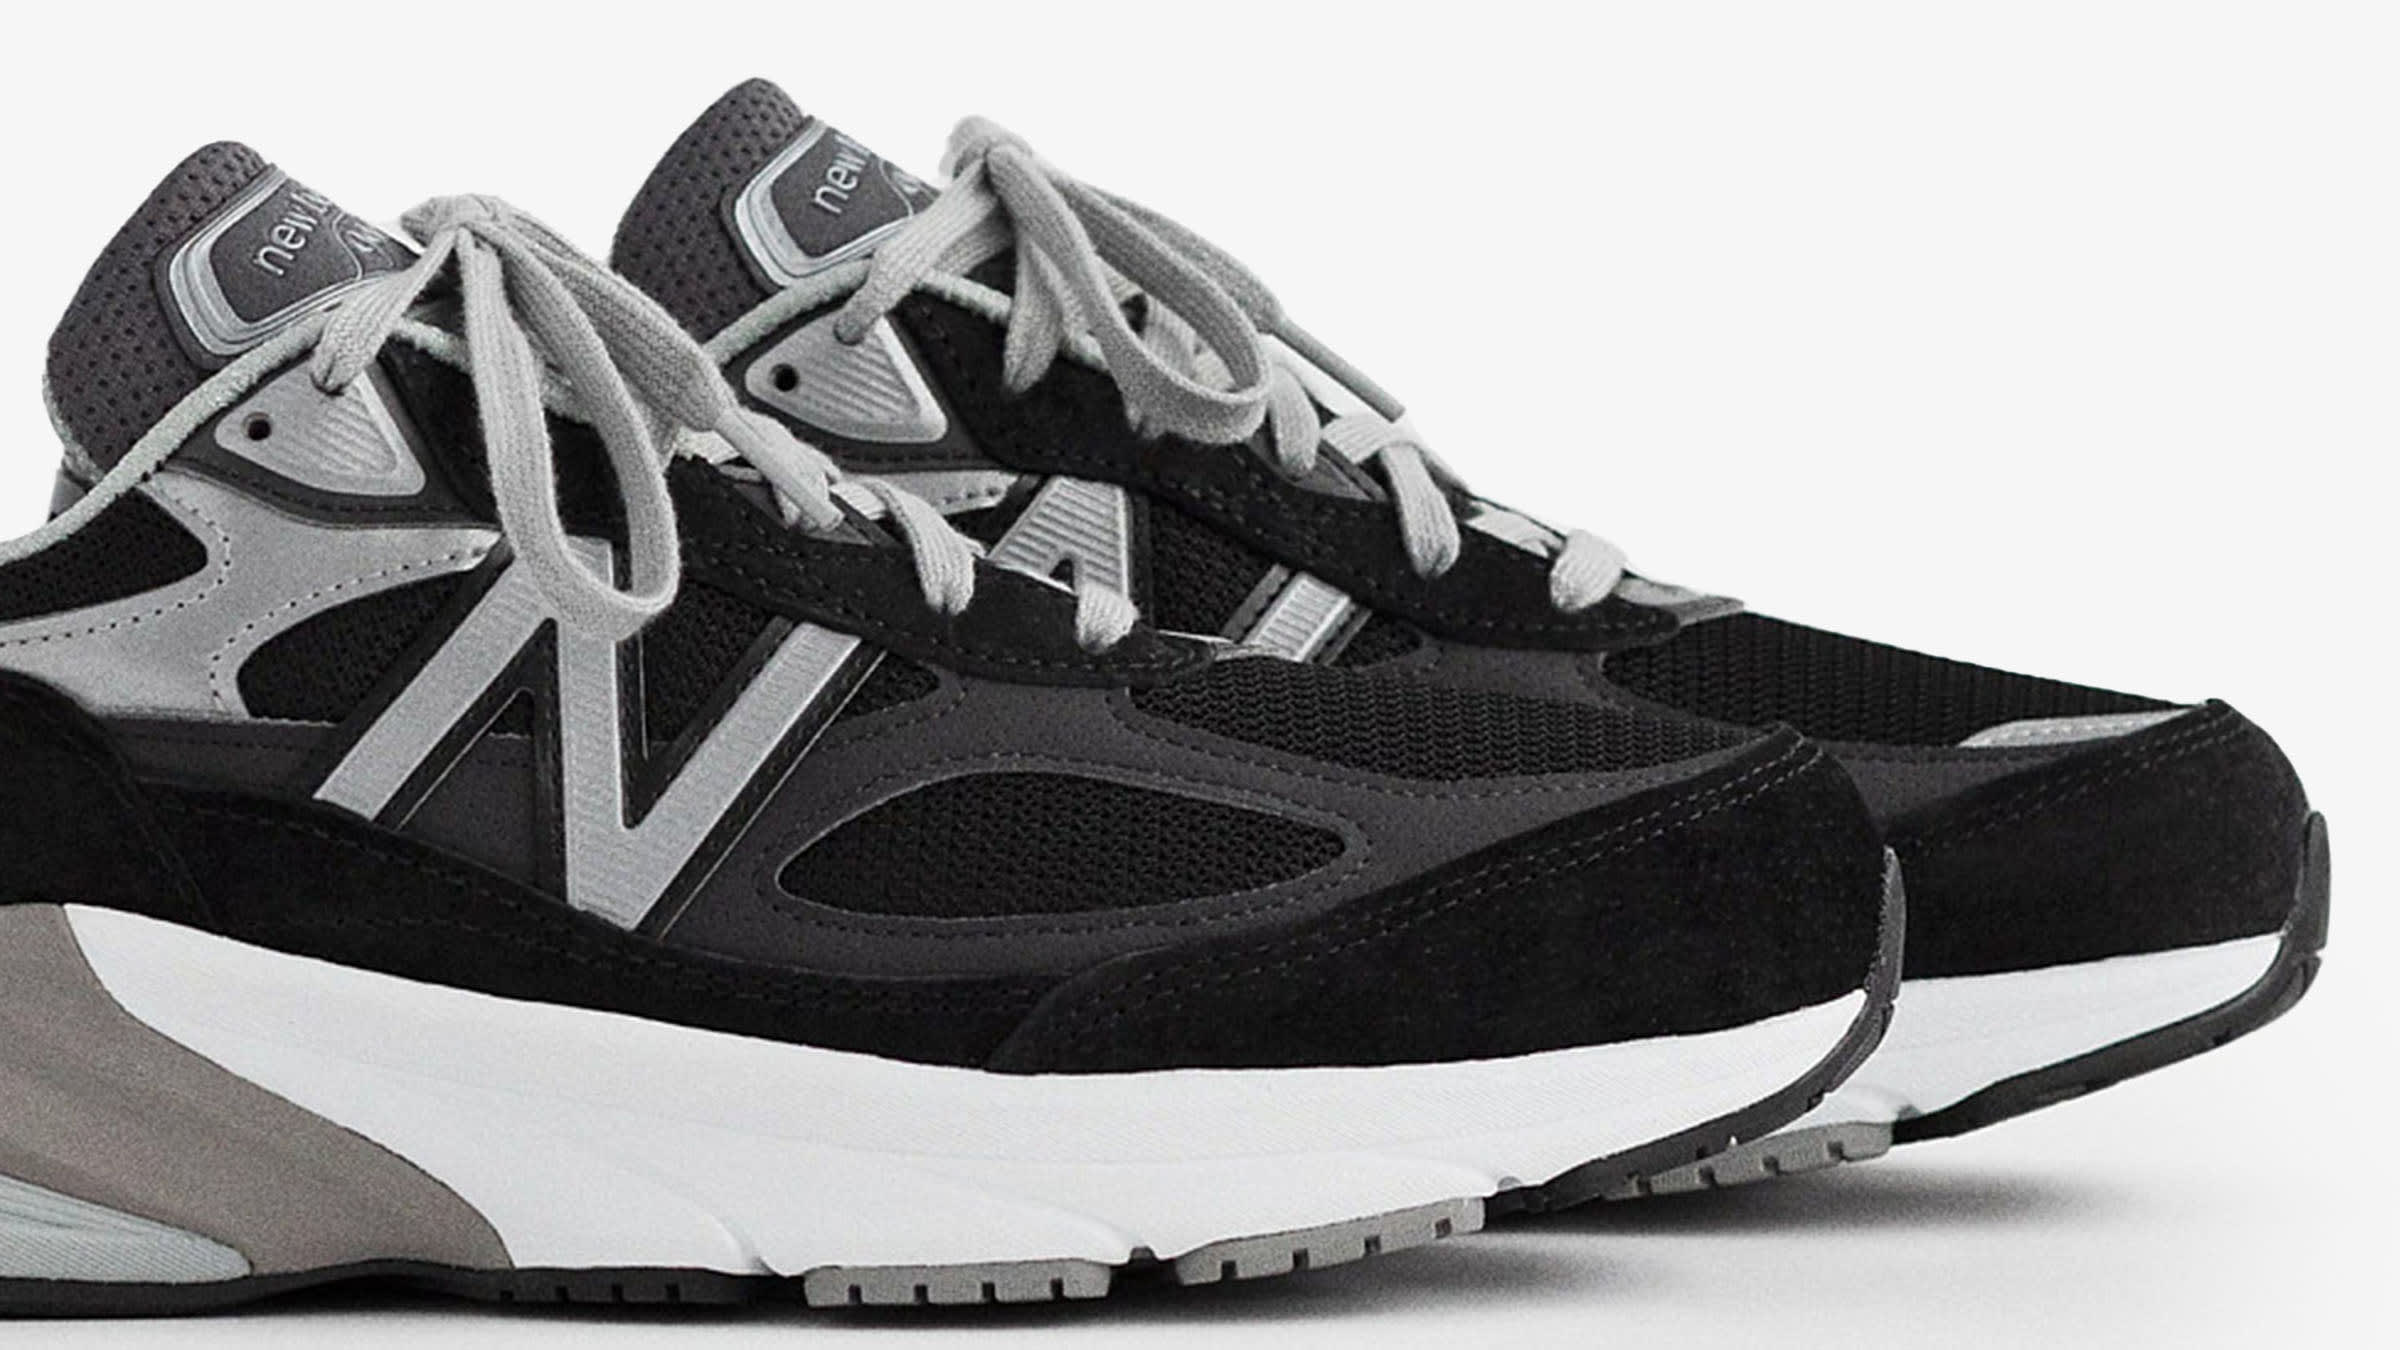 New Balance M990BK6 - Made in USA (Black) | END. Launches